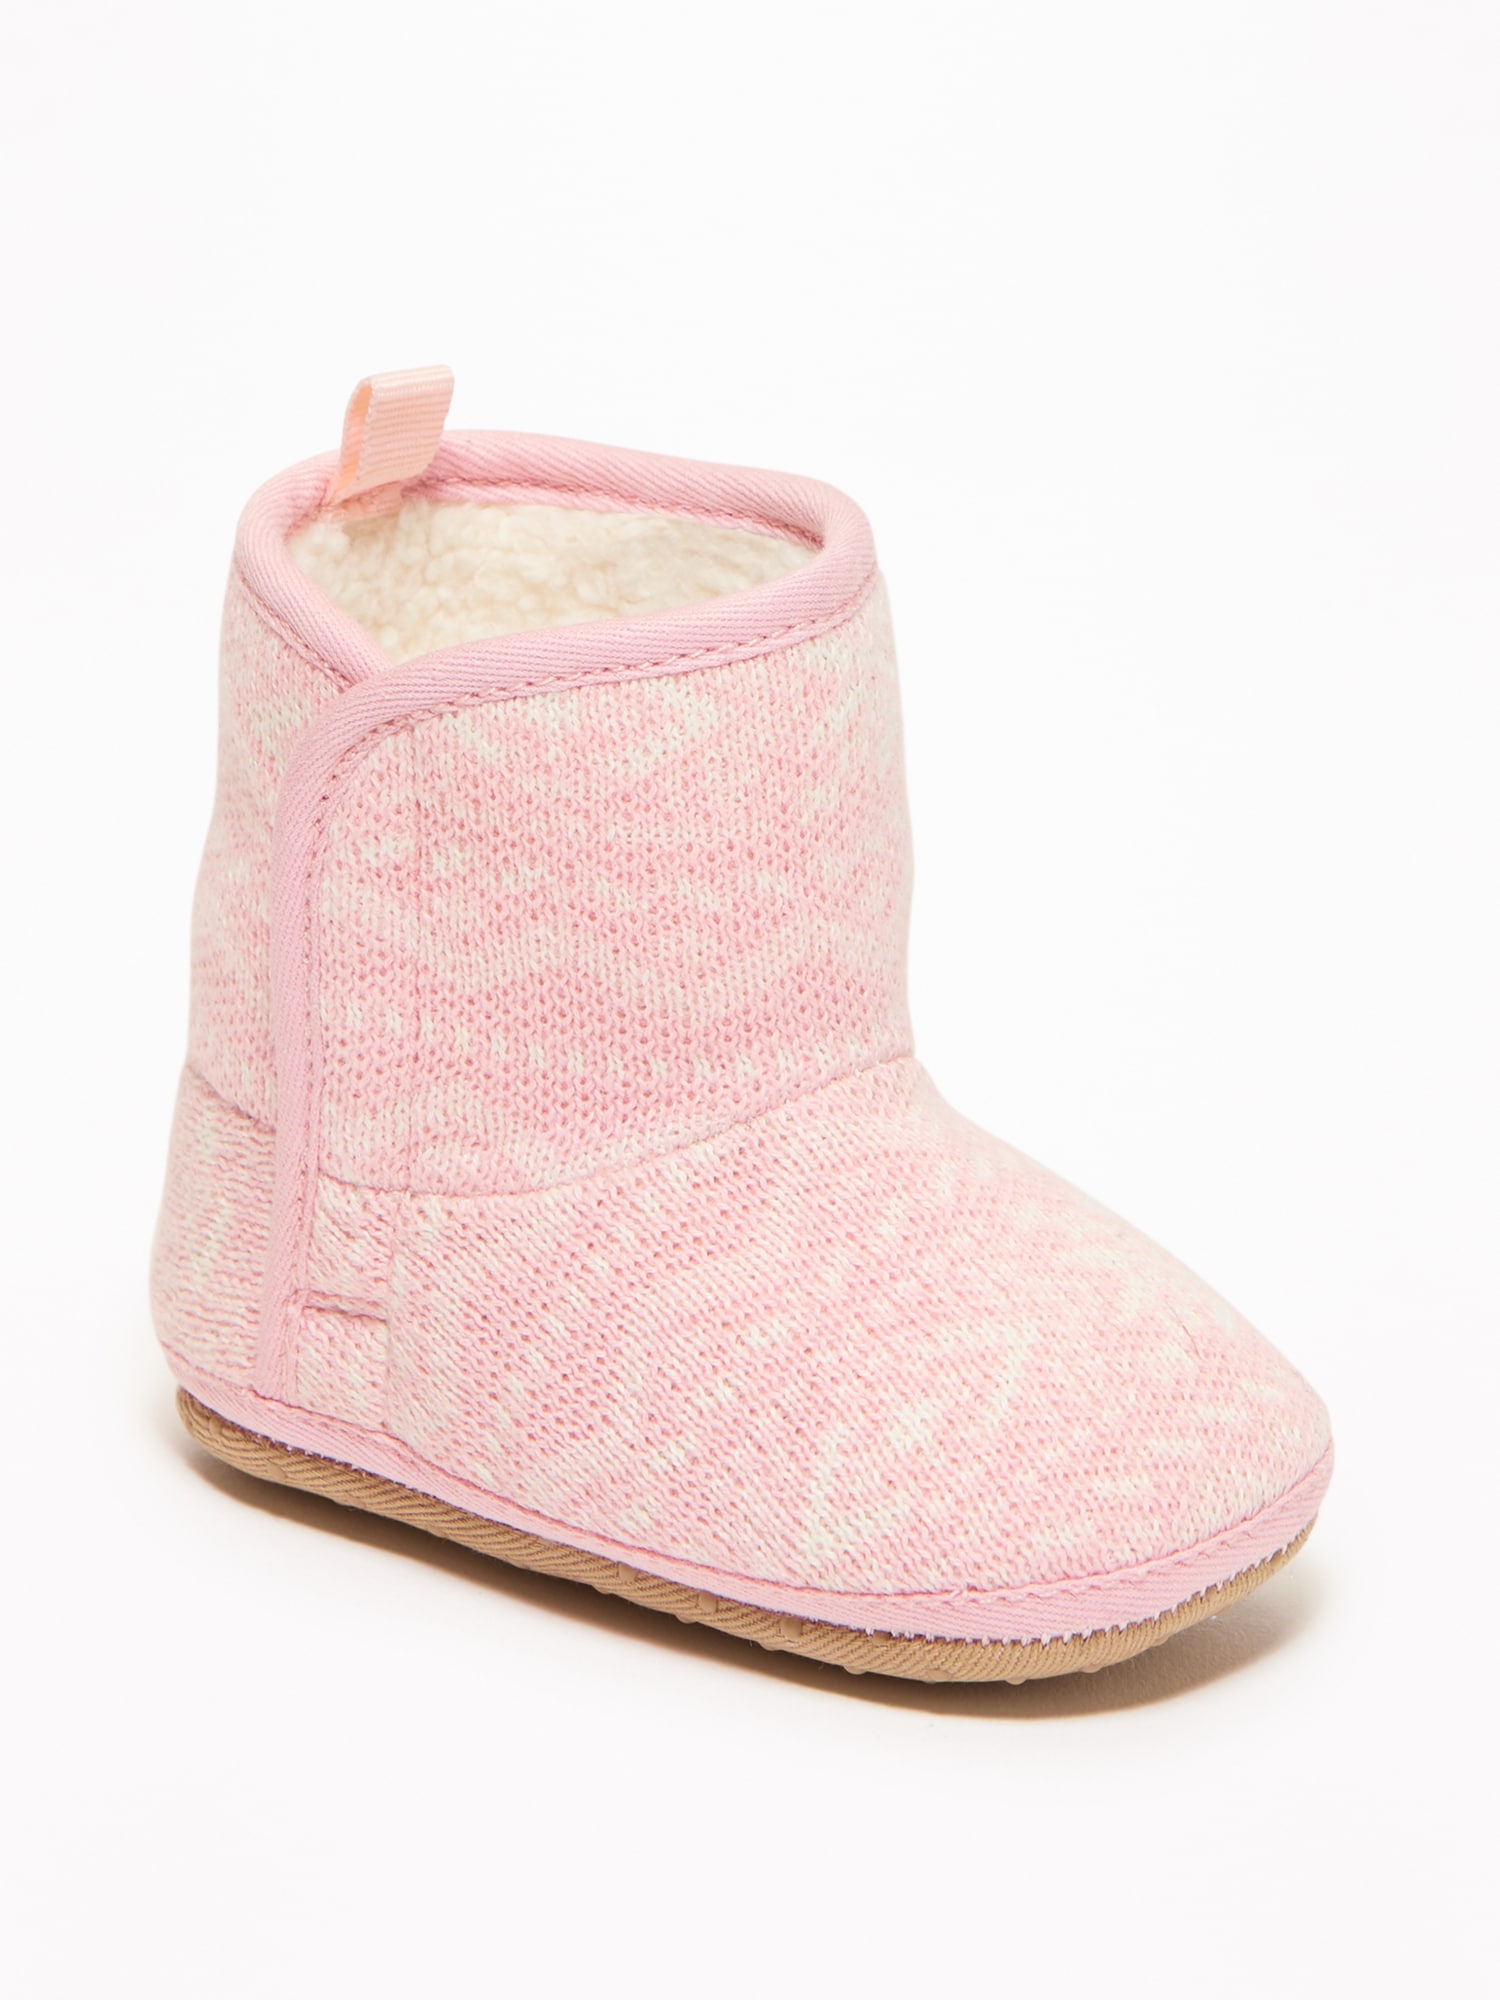 Fair Isle Sweater-Knit Booties for Baby | Old Navy